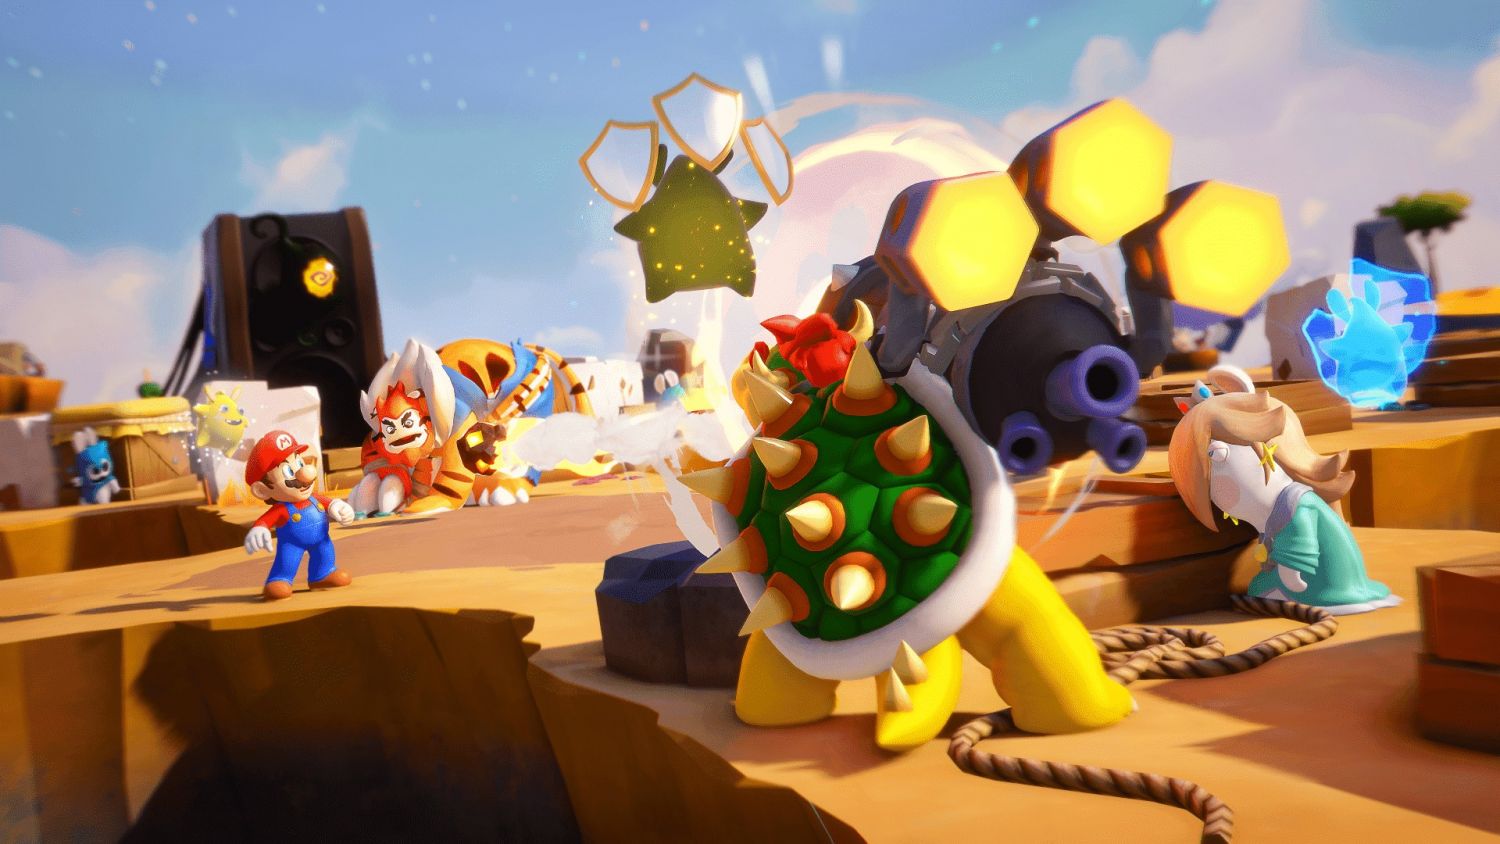 Geek Preview Mario + Rabbids Sparks of Hope Adds More Layers Of Tactical Goodness - Bowser